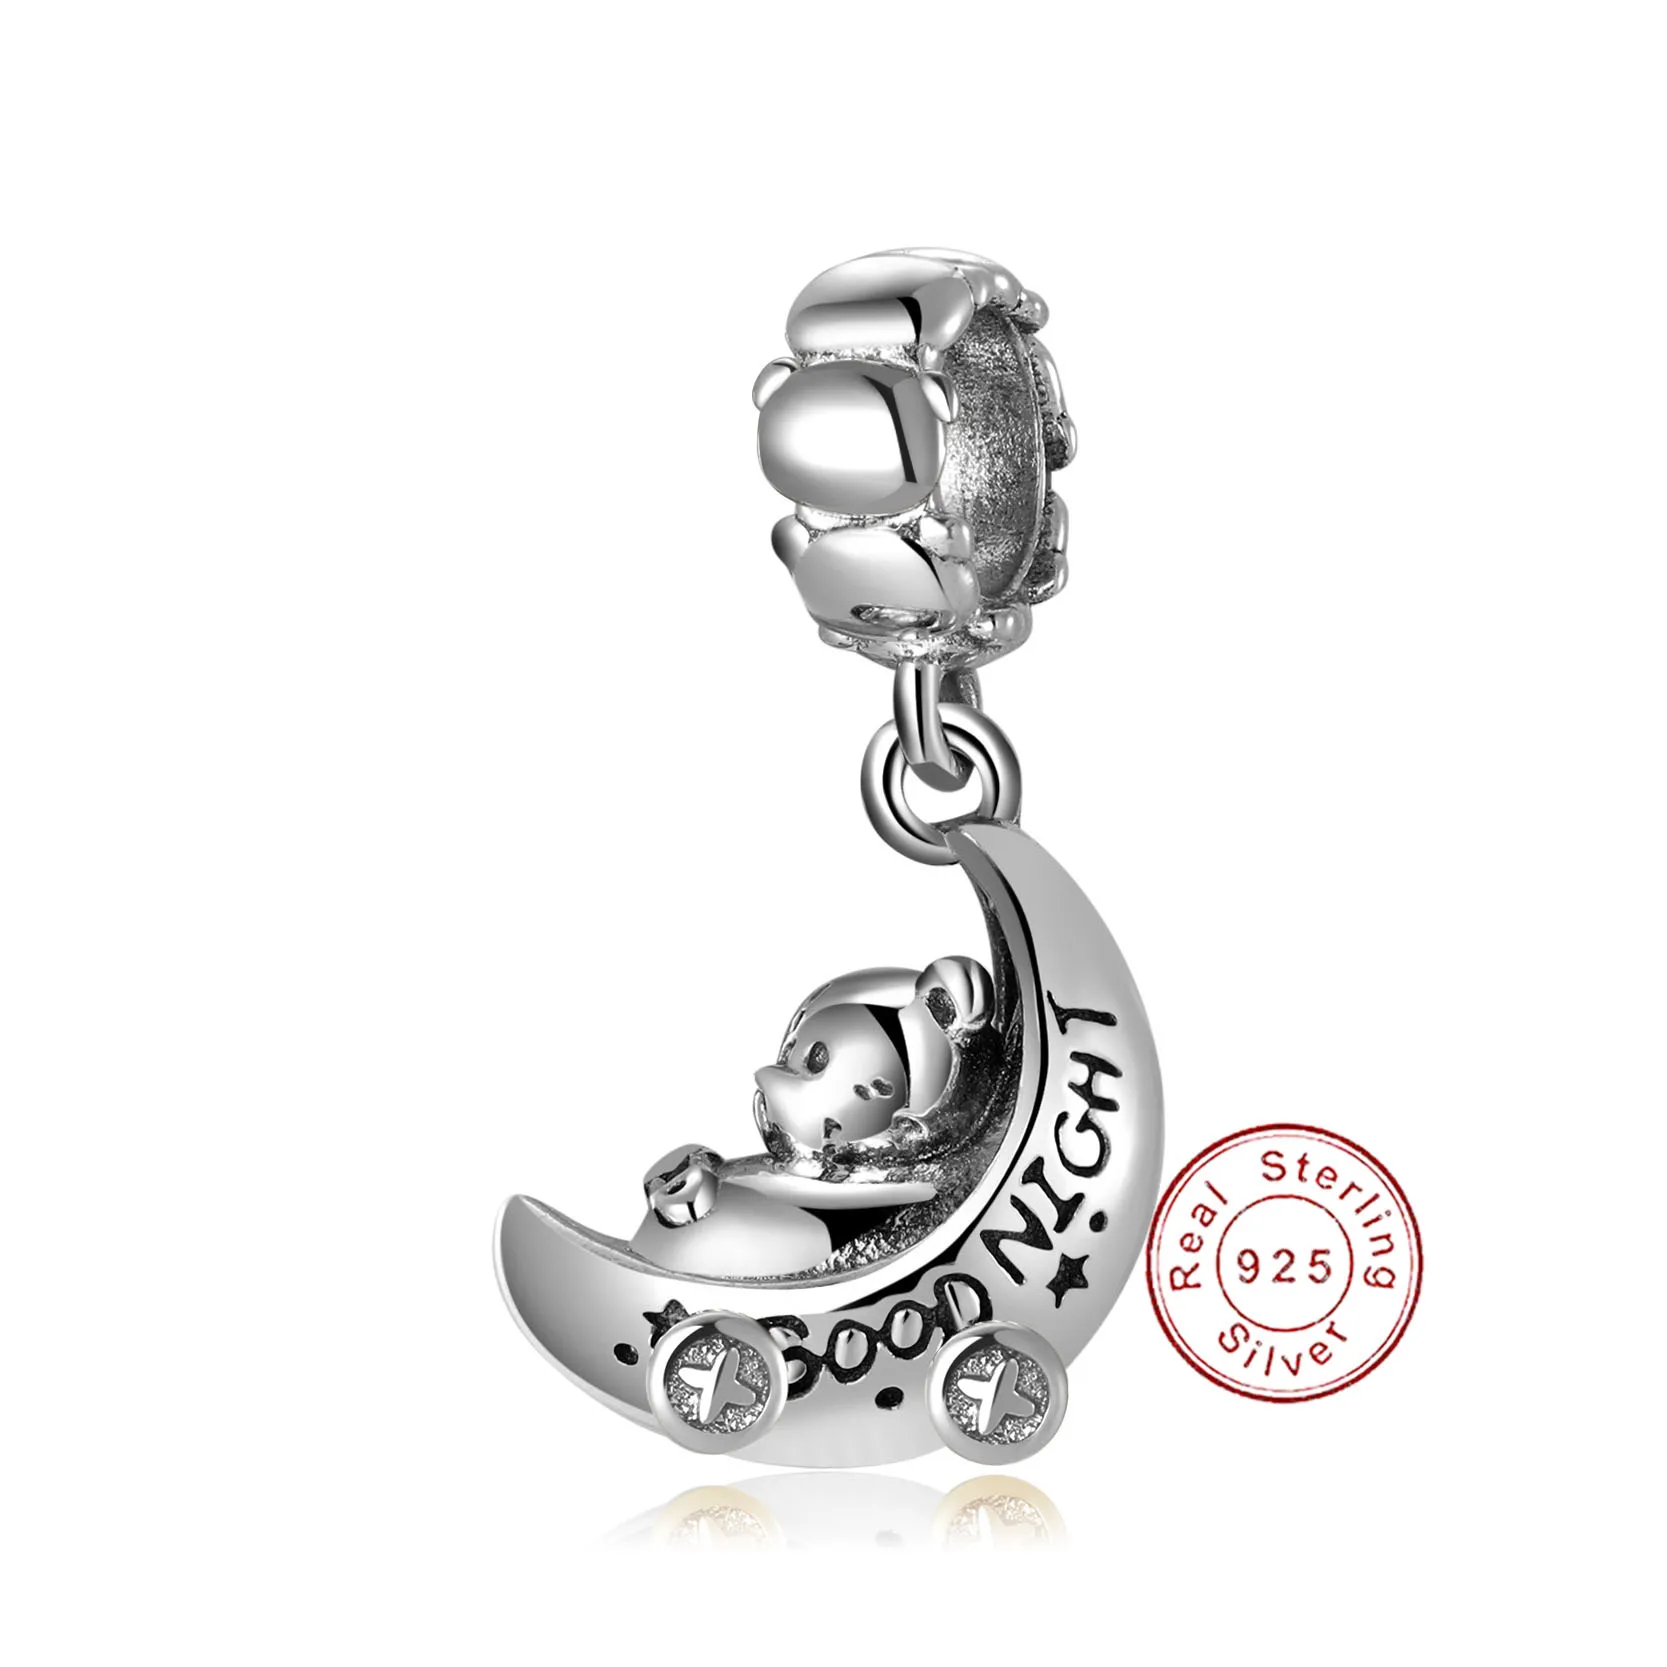 

JIALY European S925 Sterling Silver DIY Charm Bear Baby Carriage Beads Dangle Fit Original PD Bracelet For Women Jewelry